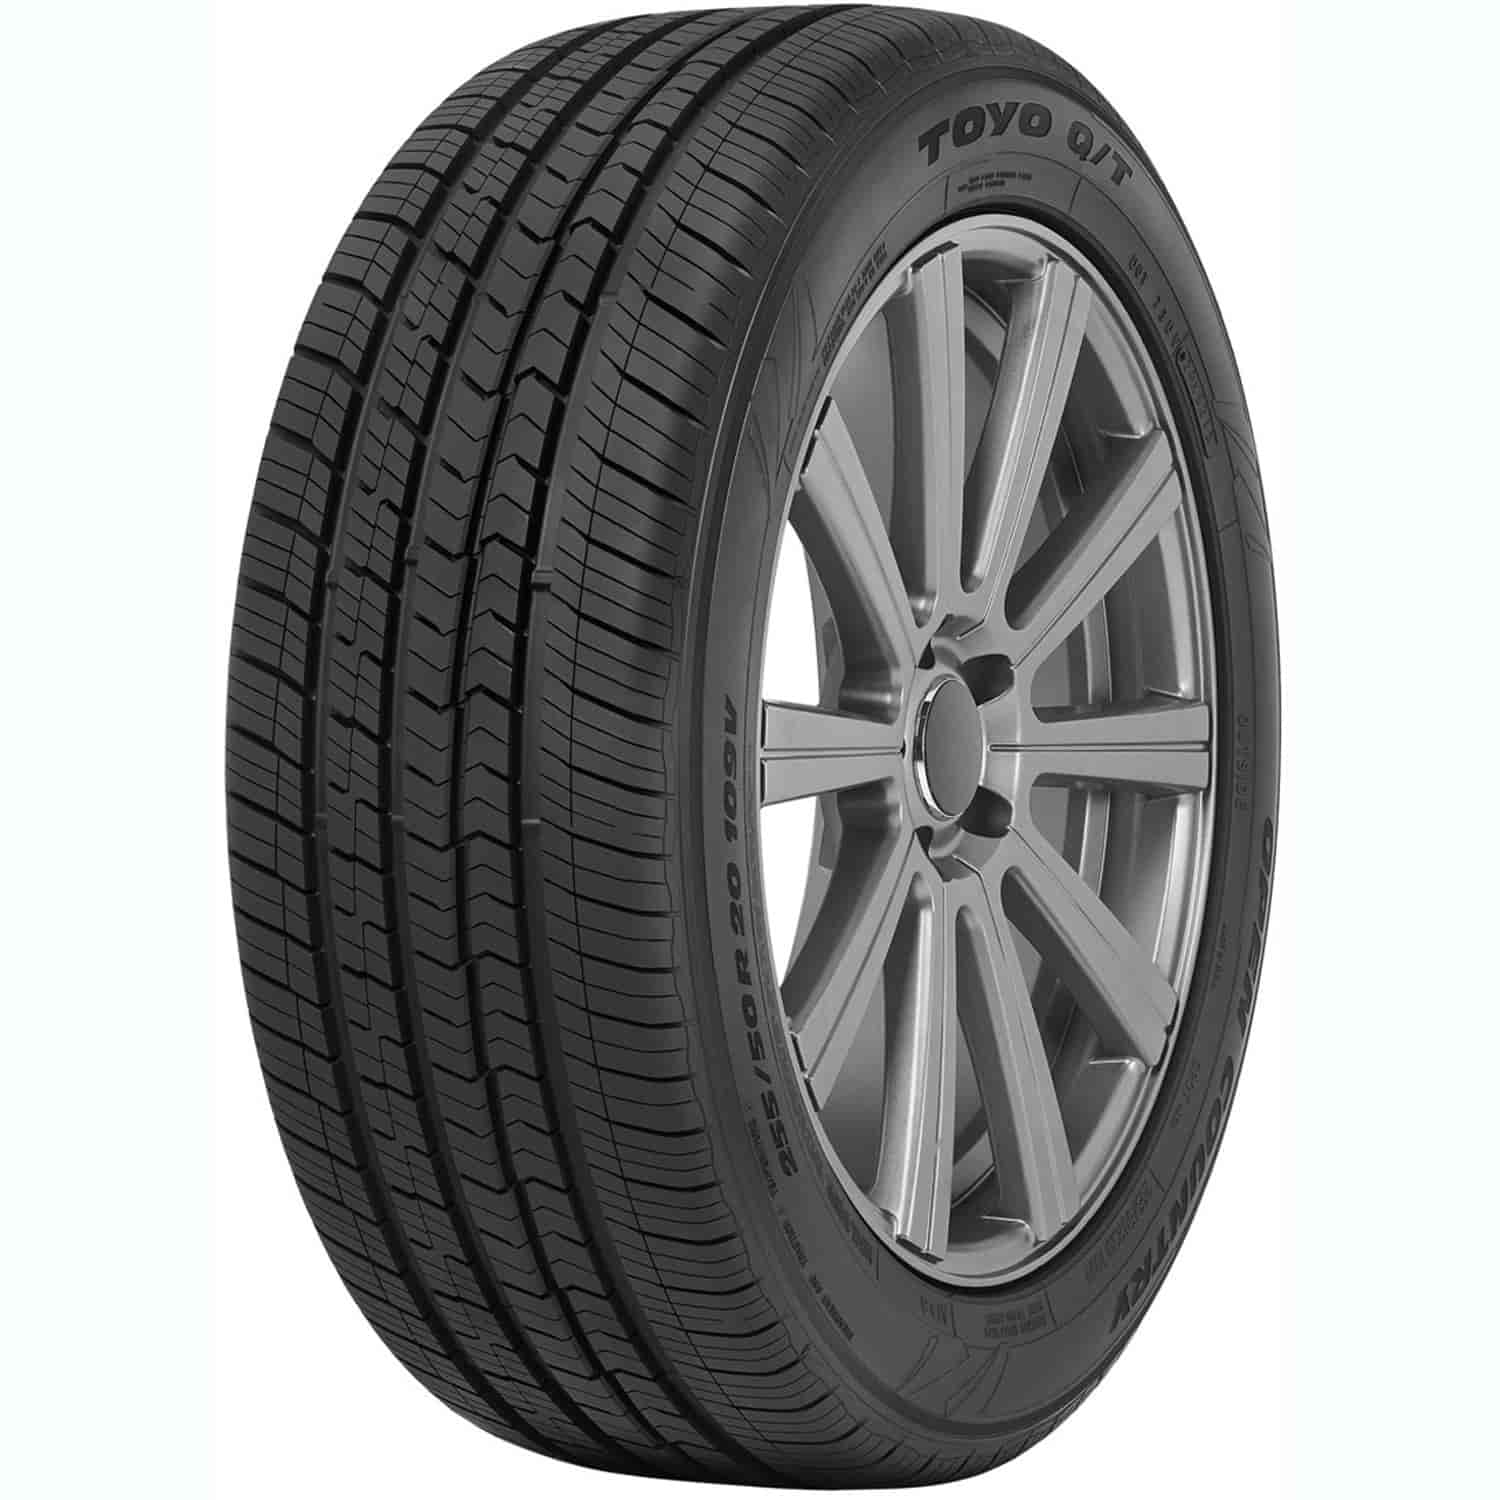 OPEN COUNTRY Q/T 235/55R18 100V